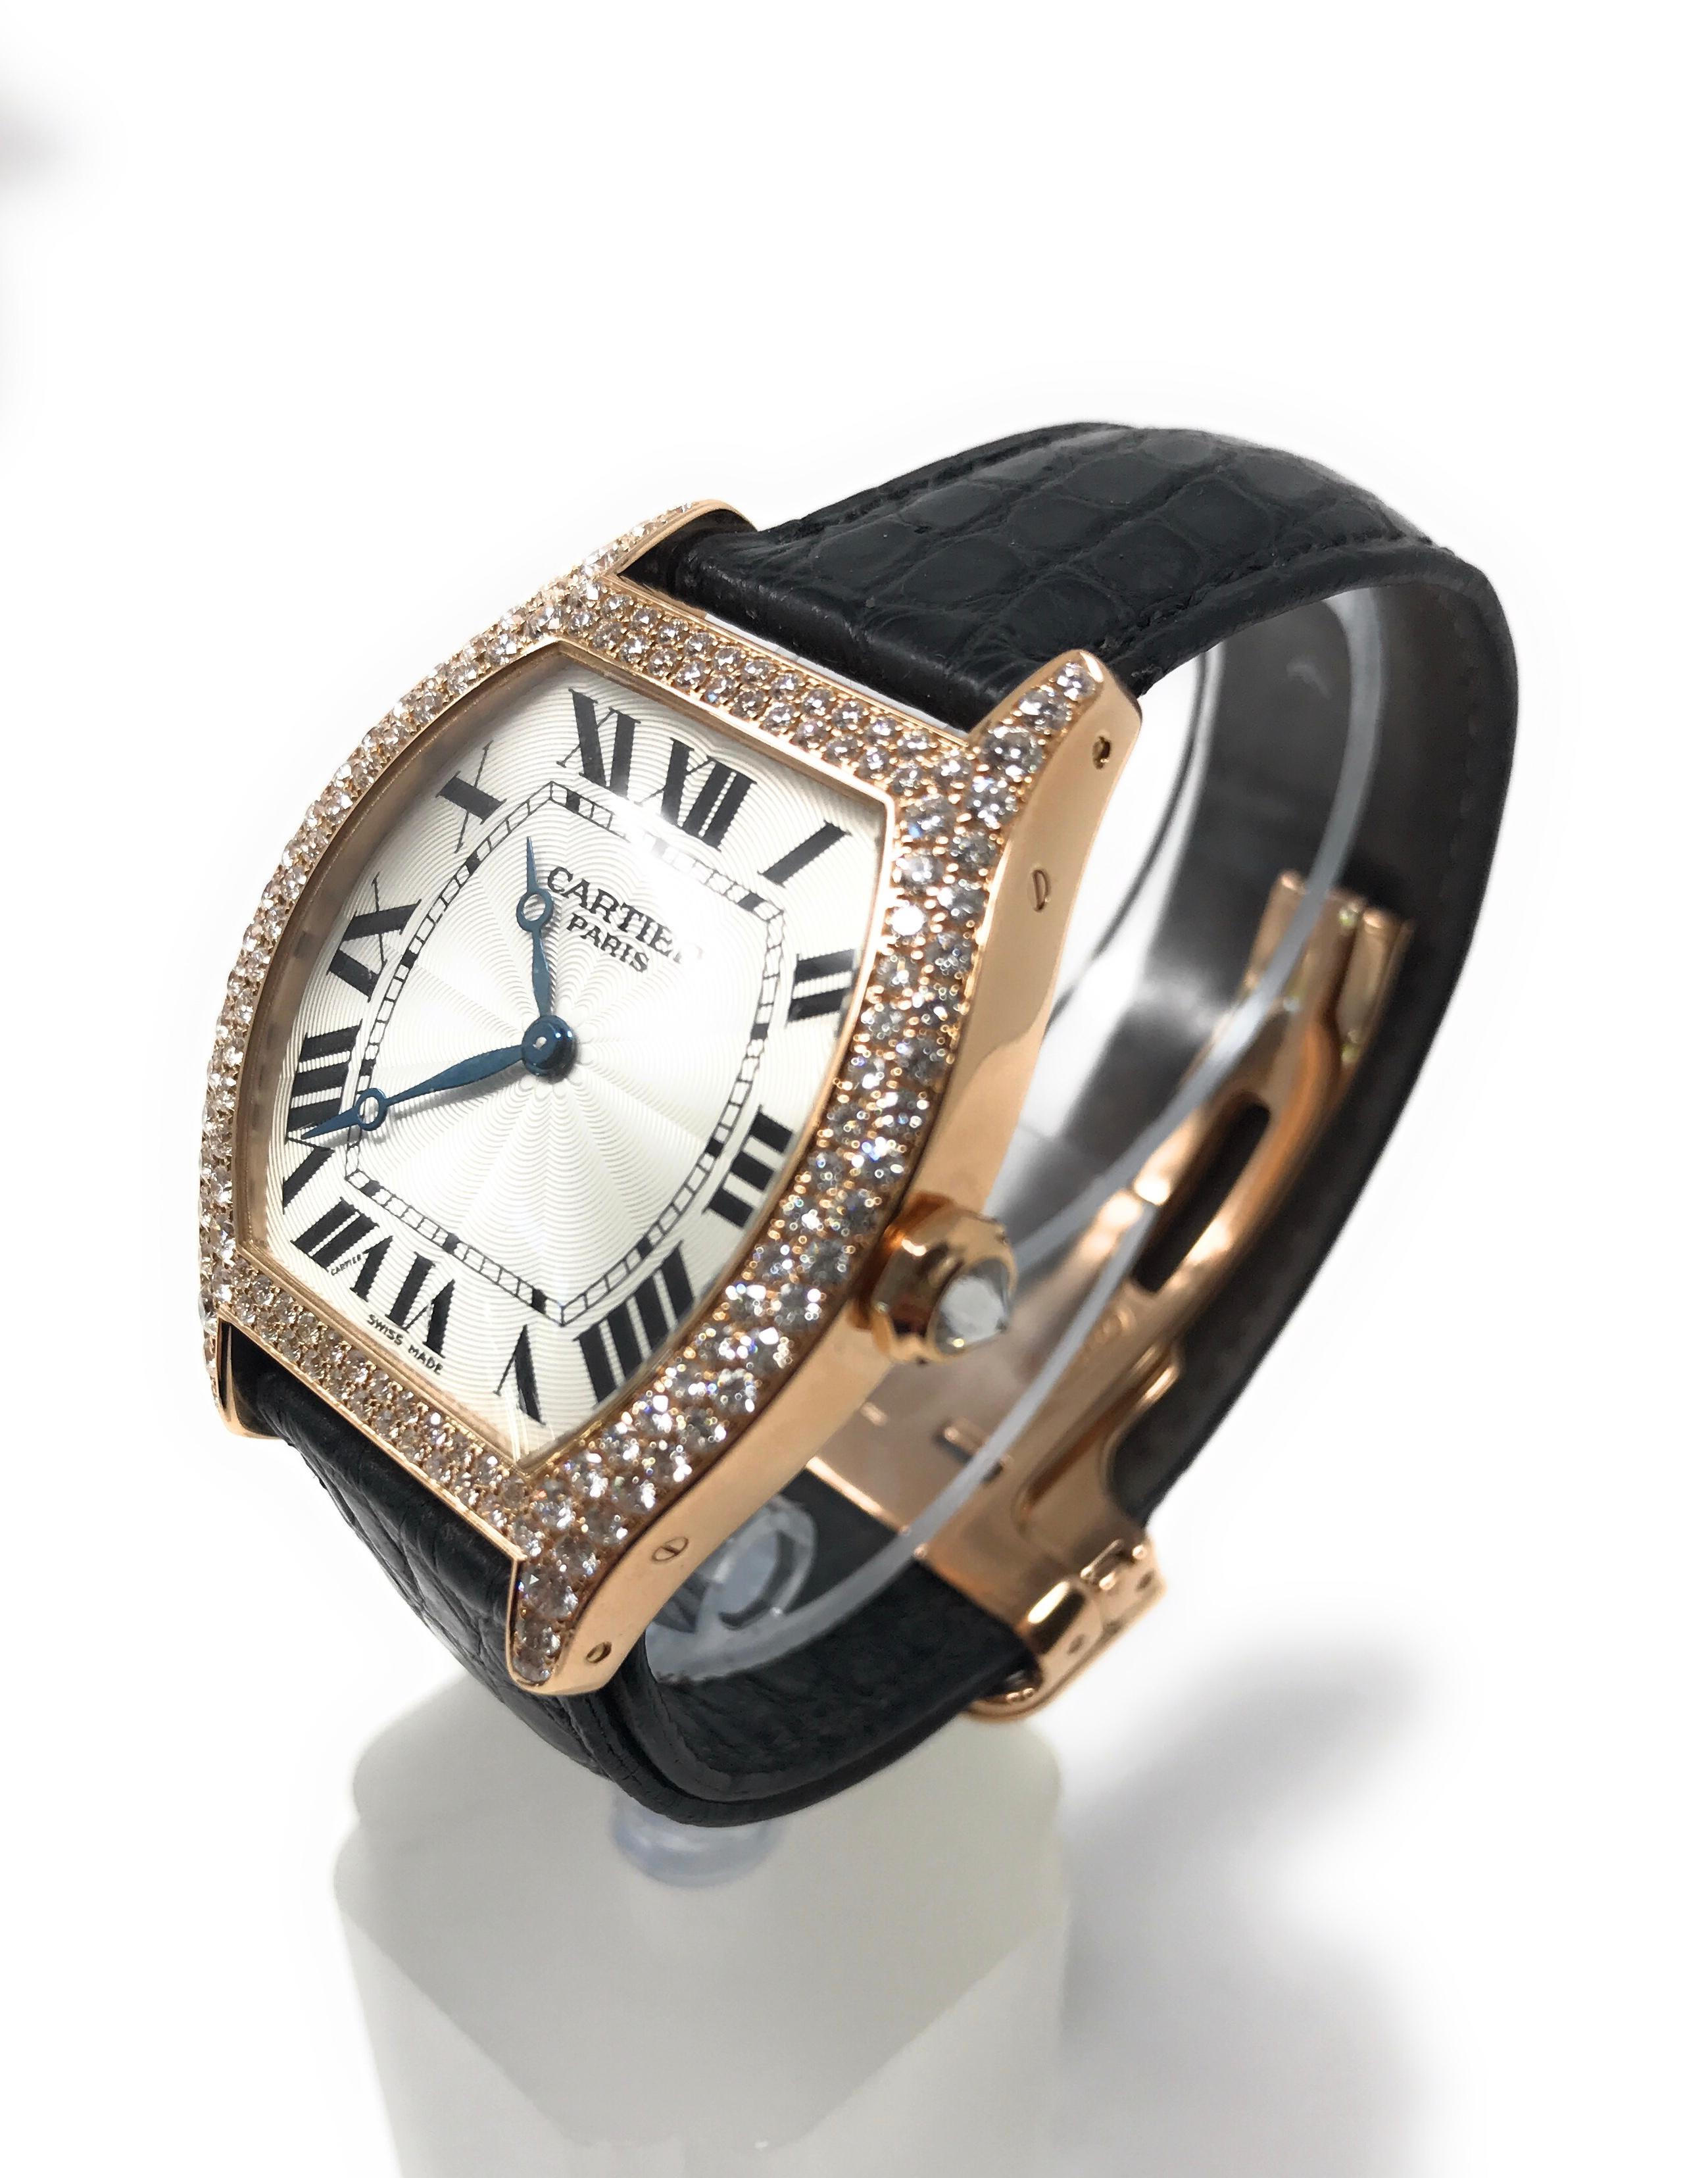 Cartier Tortue Collection De Privee Rose Gold With Diamonds  ( Medium Size )
Reference # WA503951
Case material: Rose Gold 
Case size: 34mm x 33mm
Case thickness: 8.5 mm
Bezel: Set with round brilliant cut diamonds in 2 rows
Crown: 18 karat rose